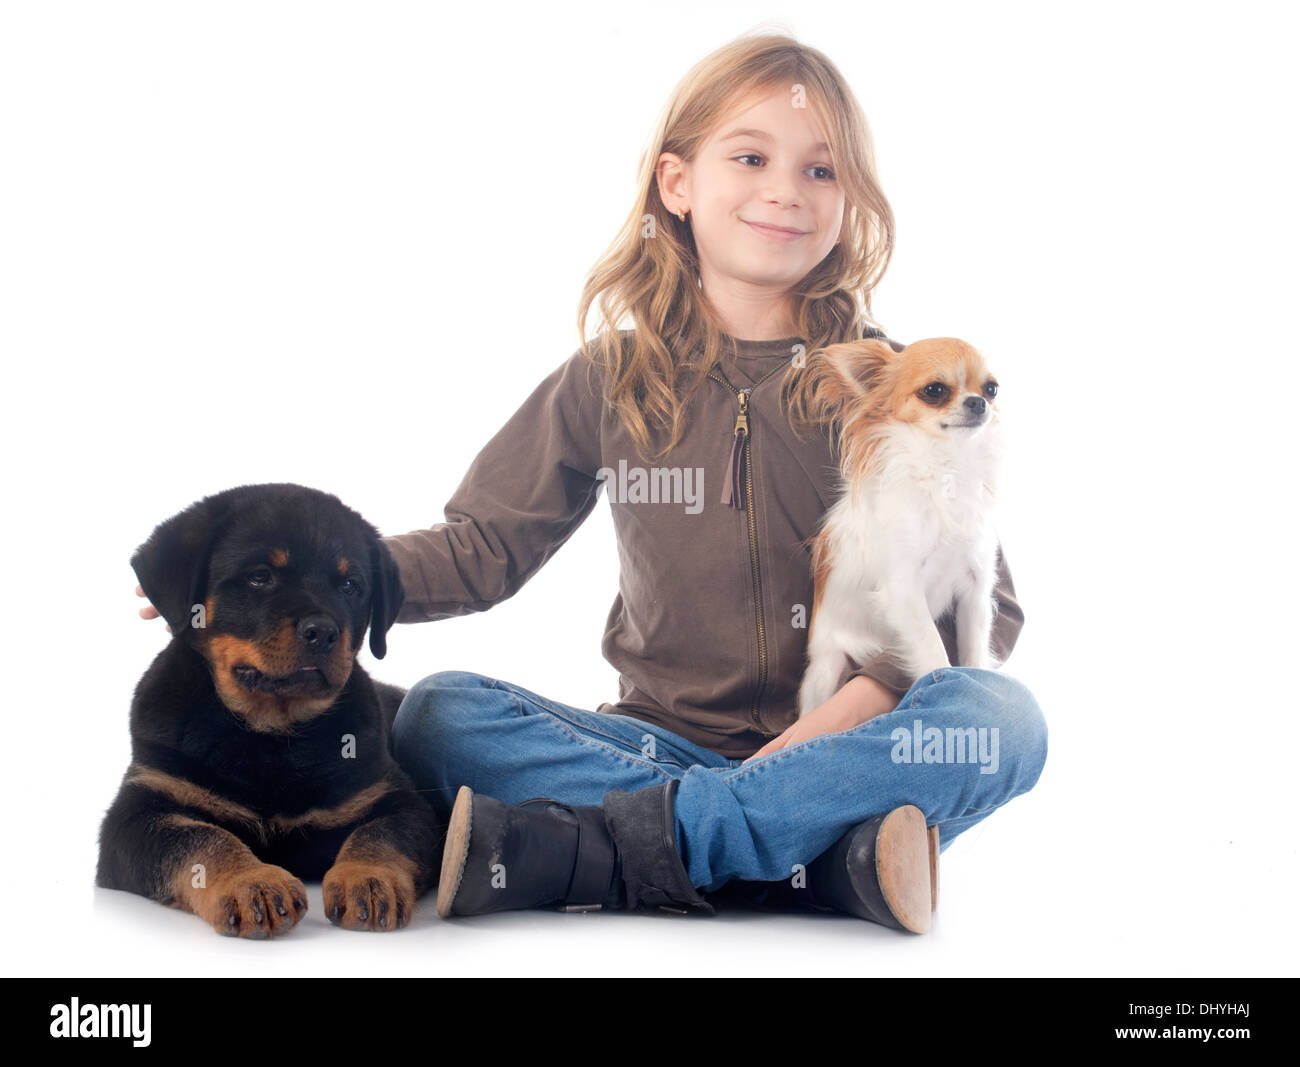 child and dogs in front of white background Stock Photo